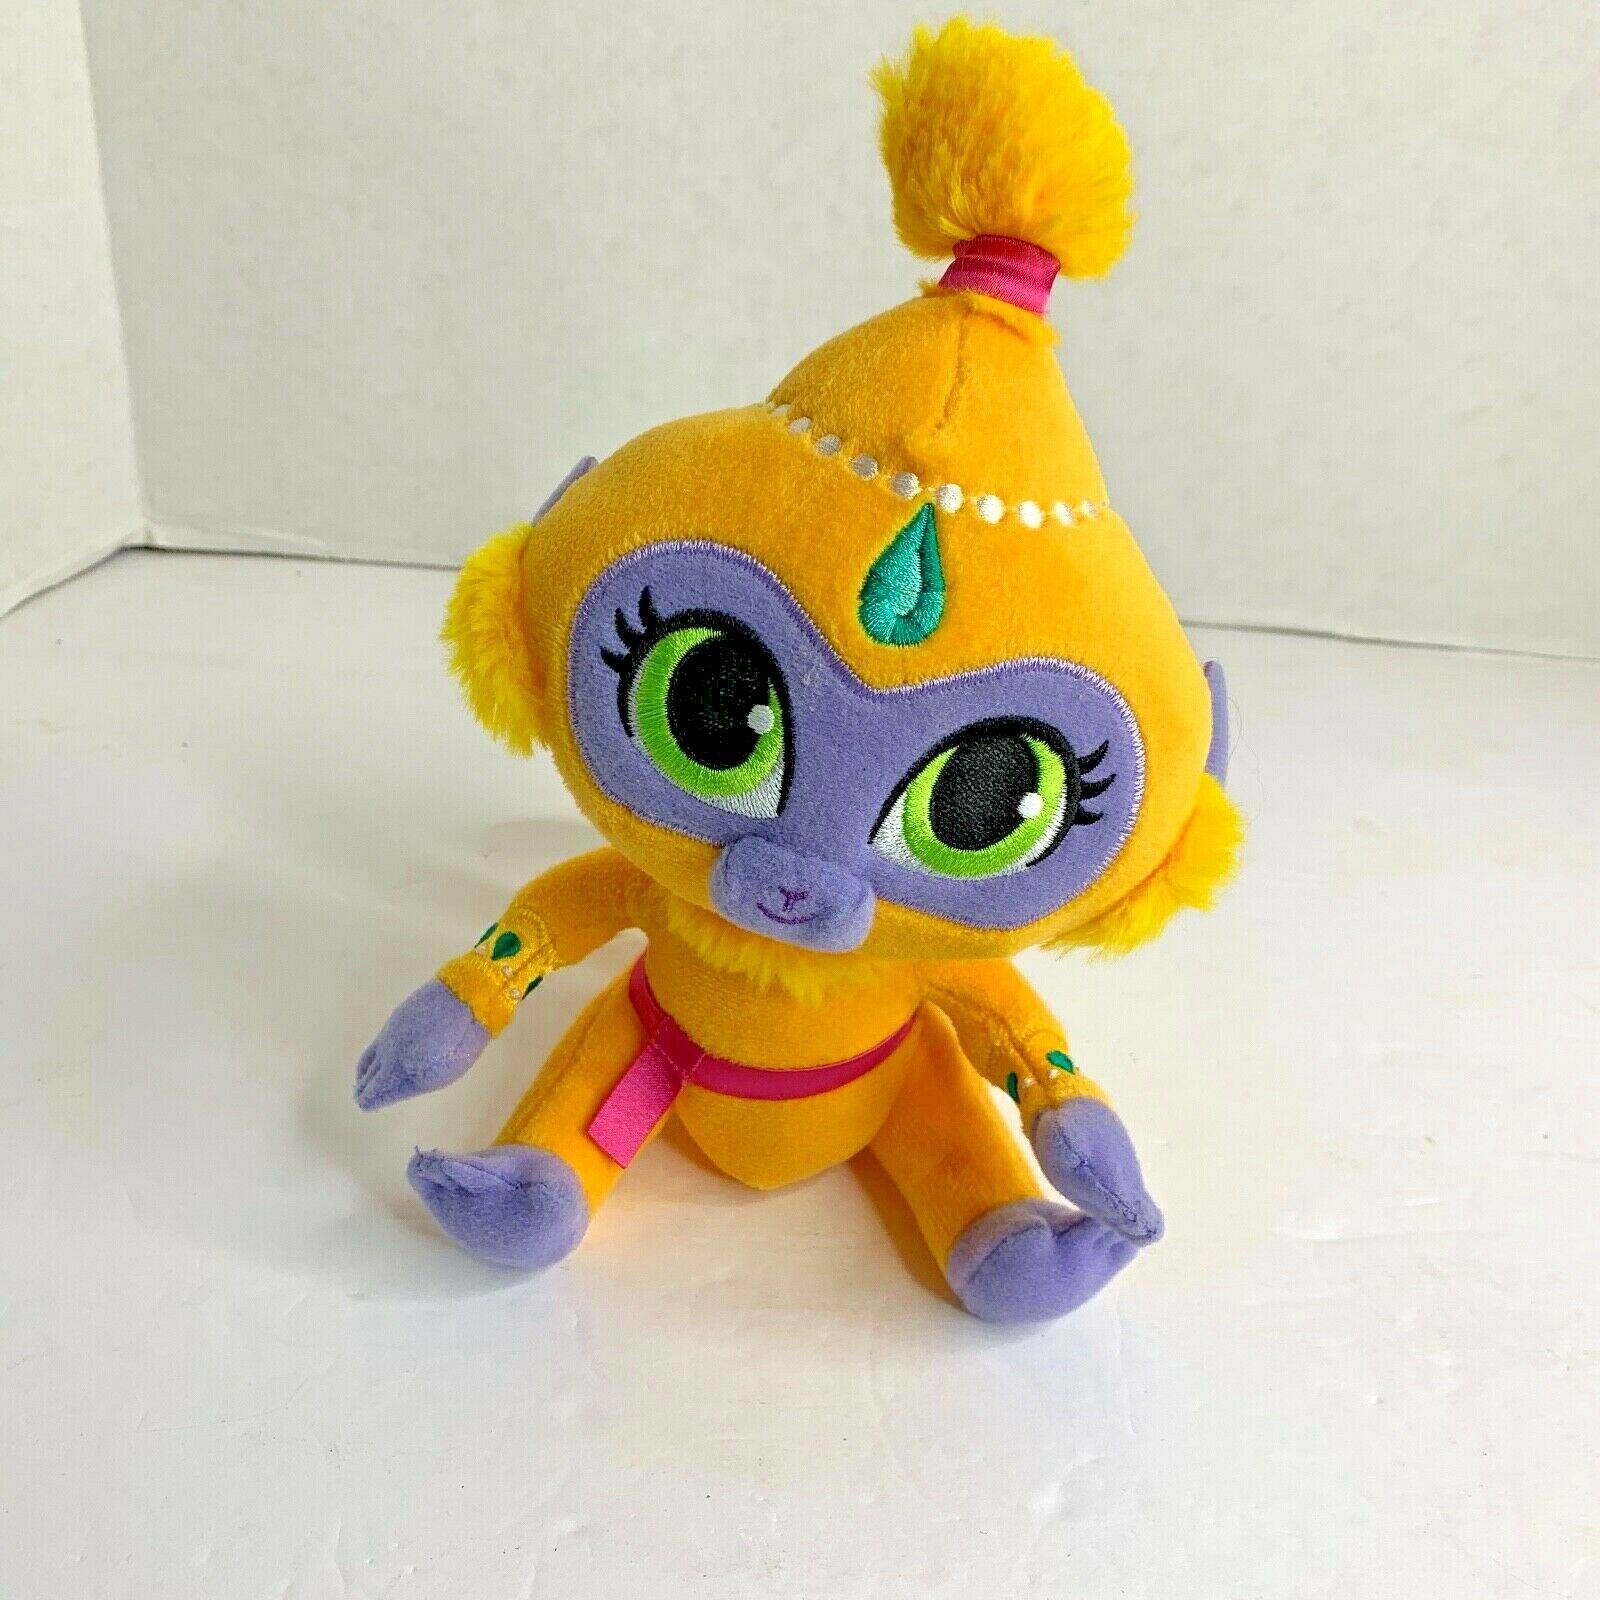 Primary image for Nickelodeon Shimmer and Shine Plush Stuffed Doll Toy 6 in Tala Monkey Chimp 